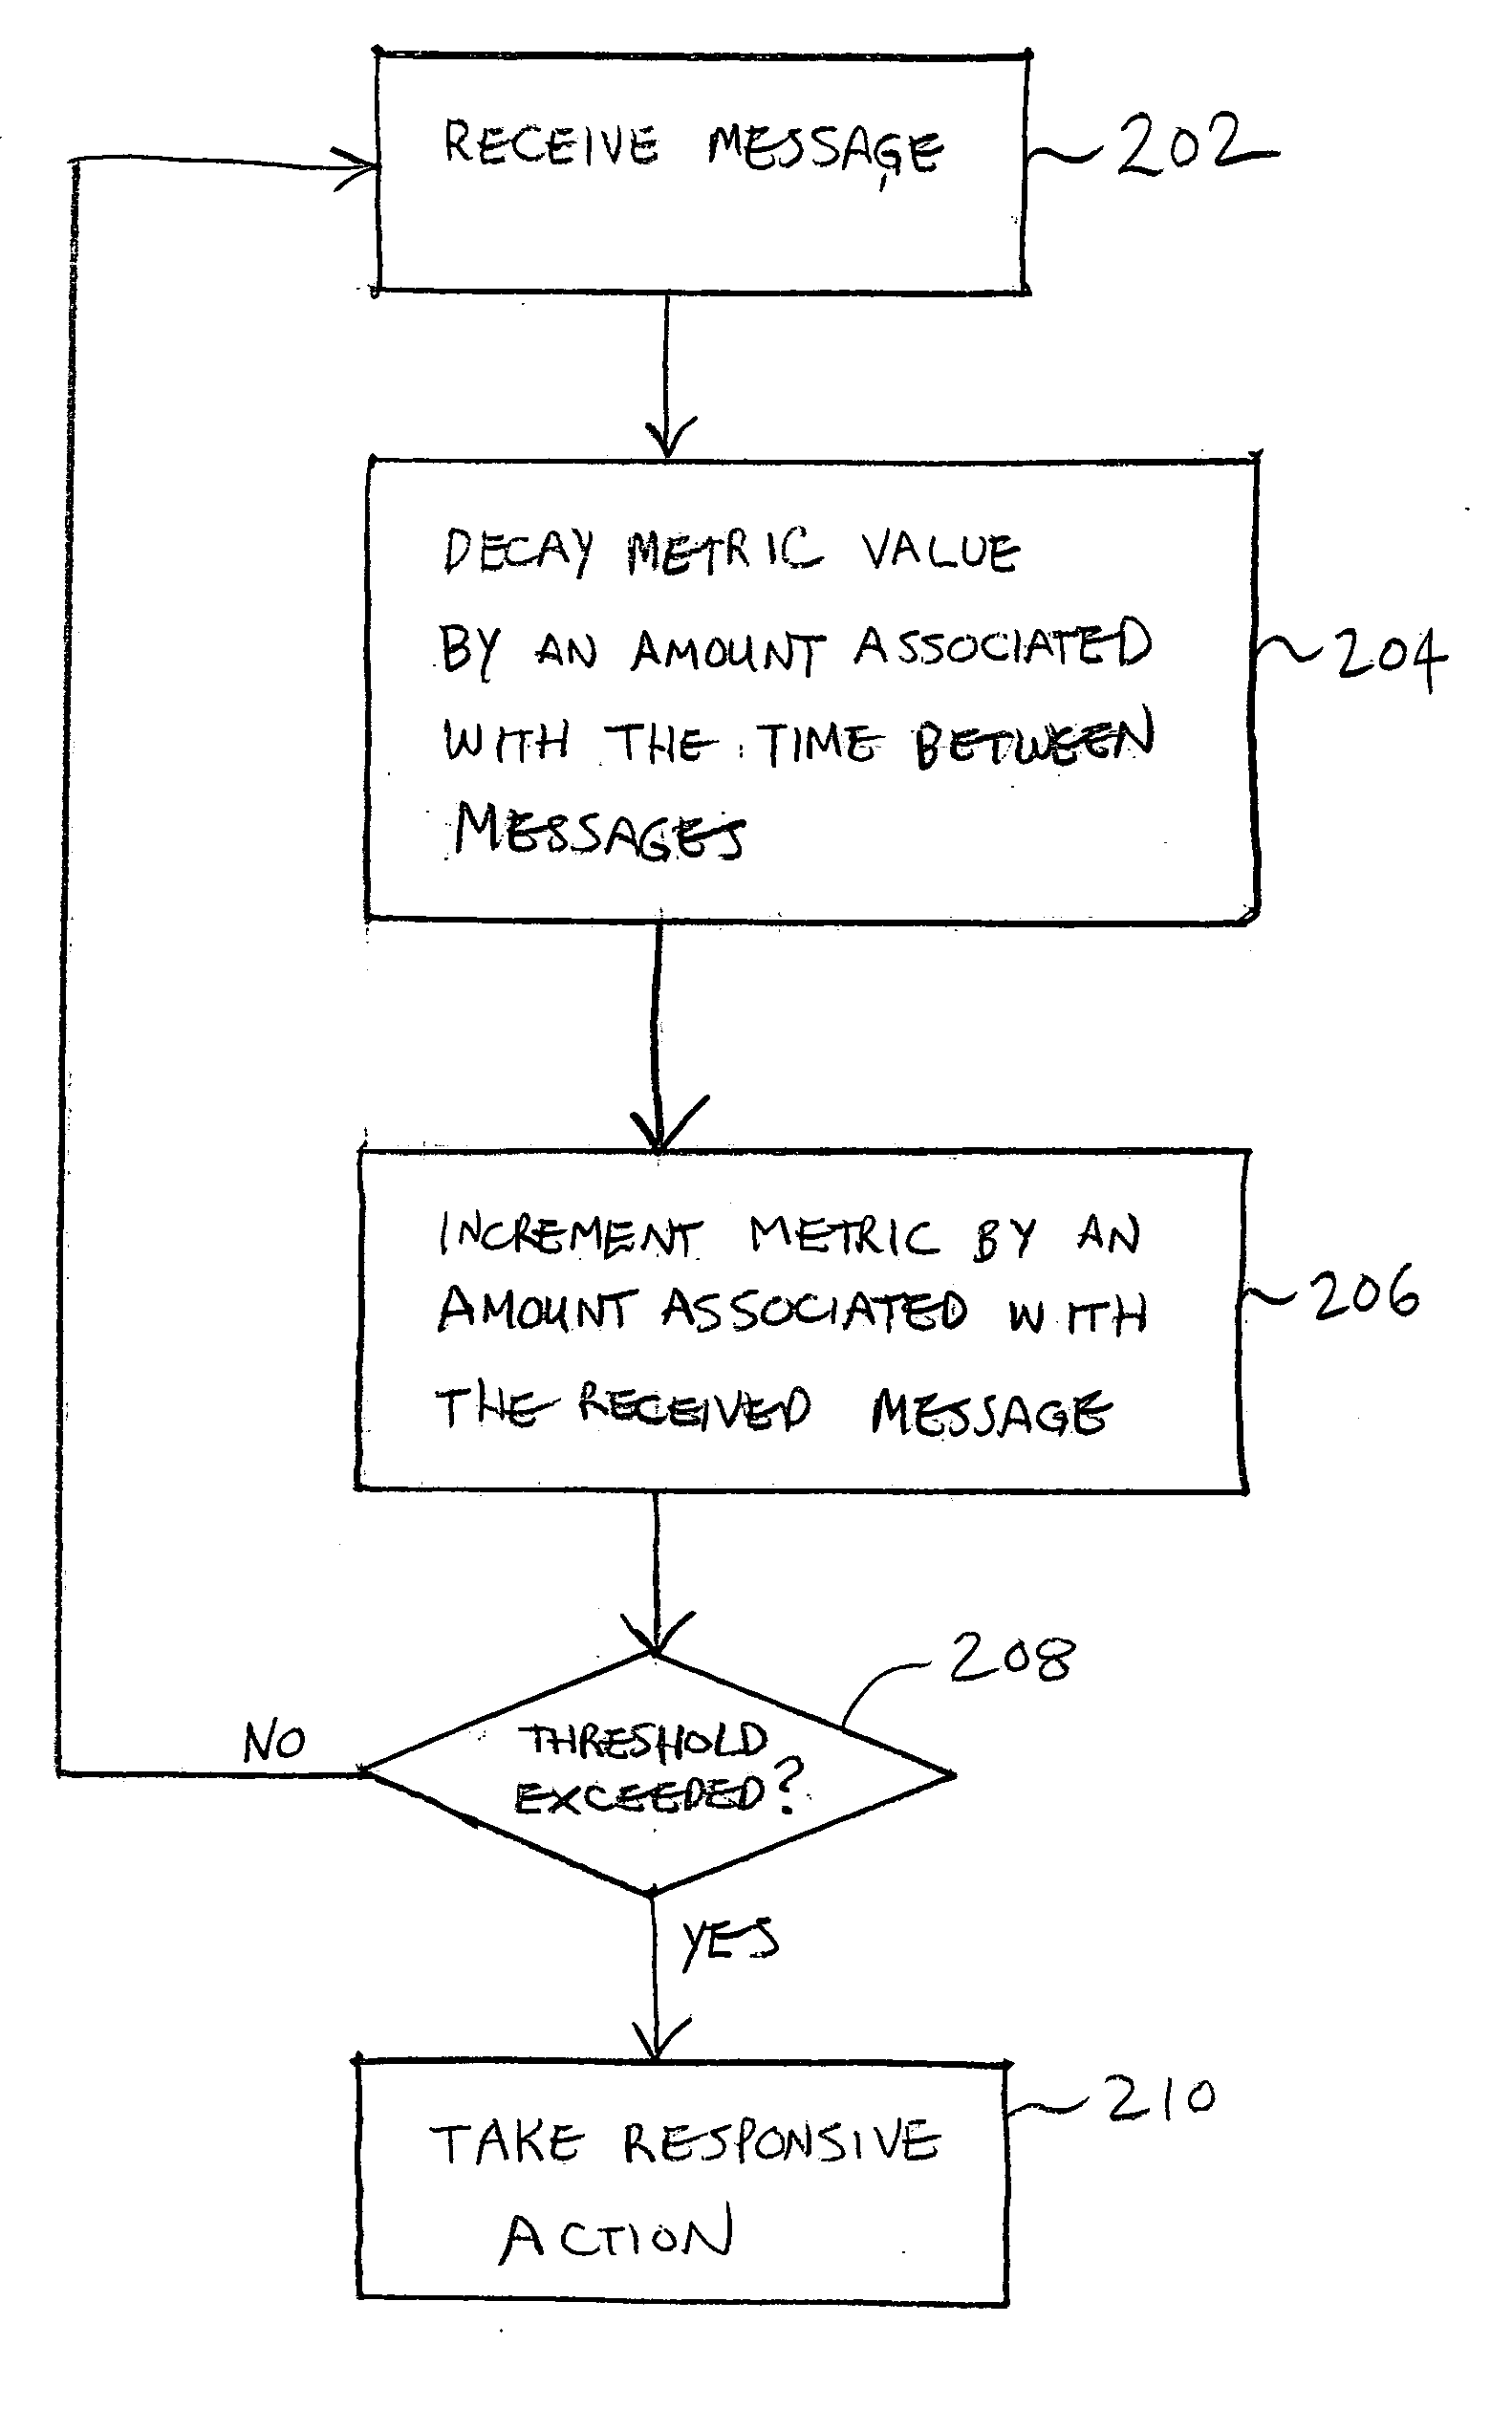 Metric-based monitoring and control of a limited resource